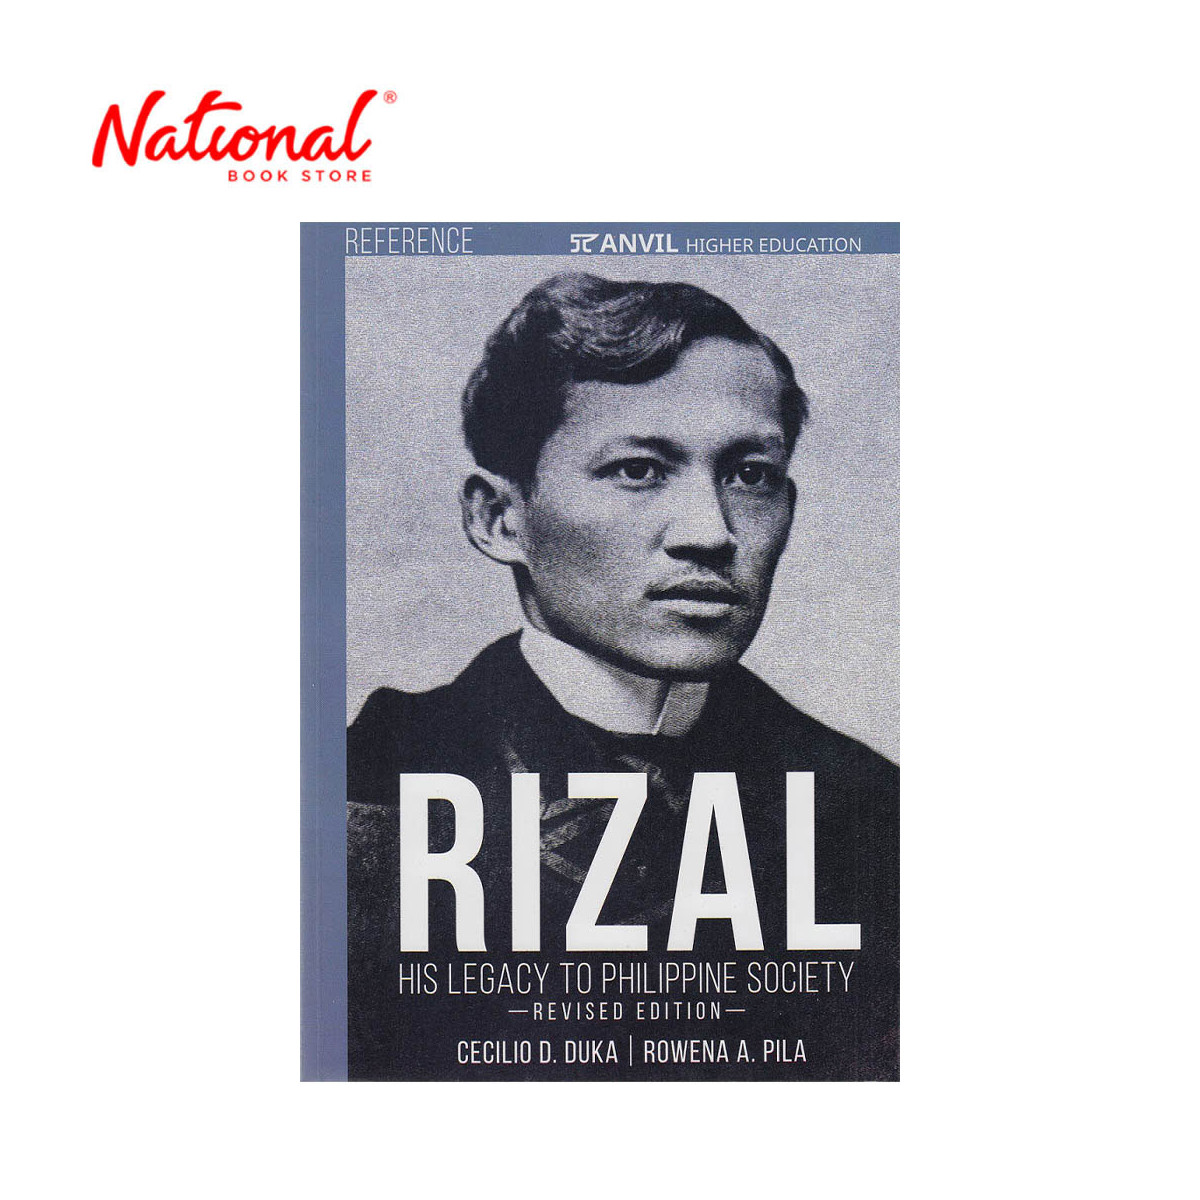 Rizal: His Legacy to Philippine Society, Revised Edition by Cecilio Duka, et.al - Trade Paperback